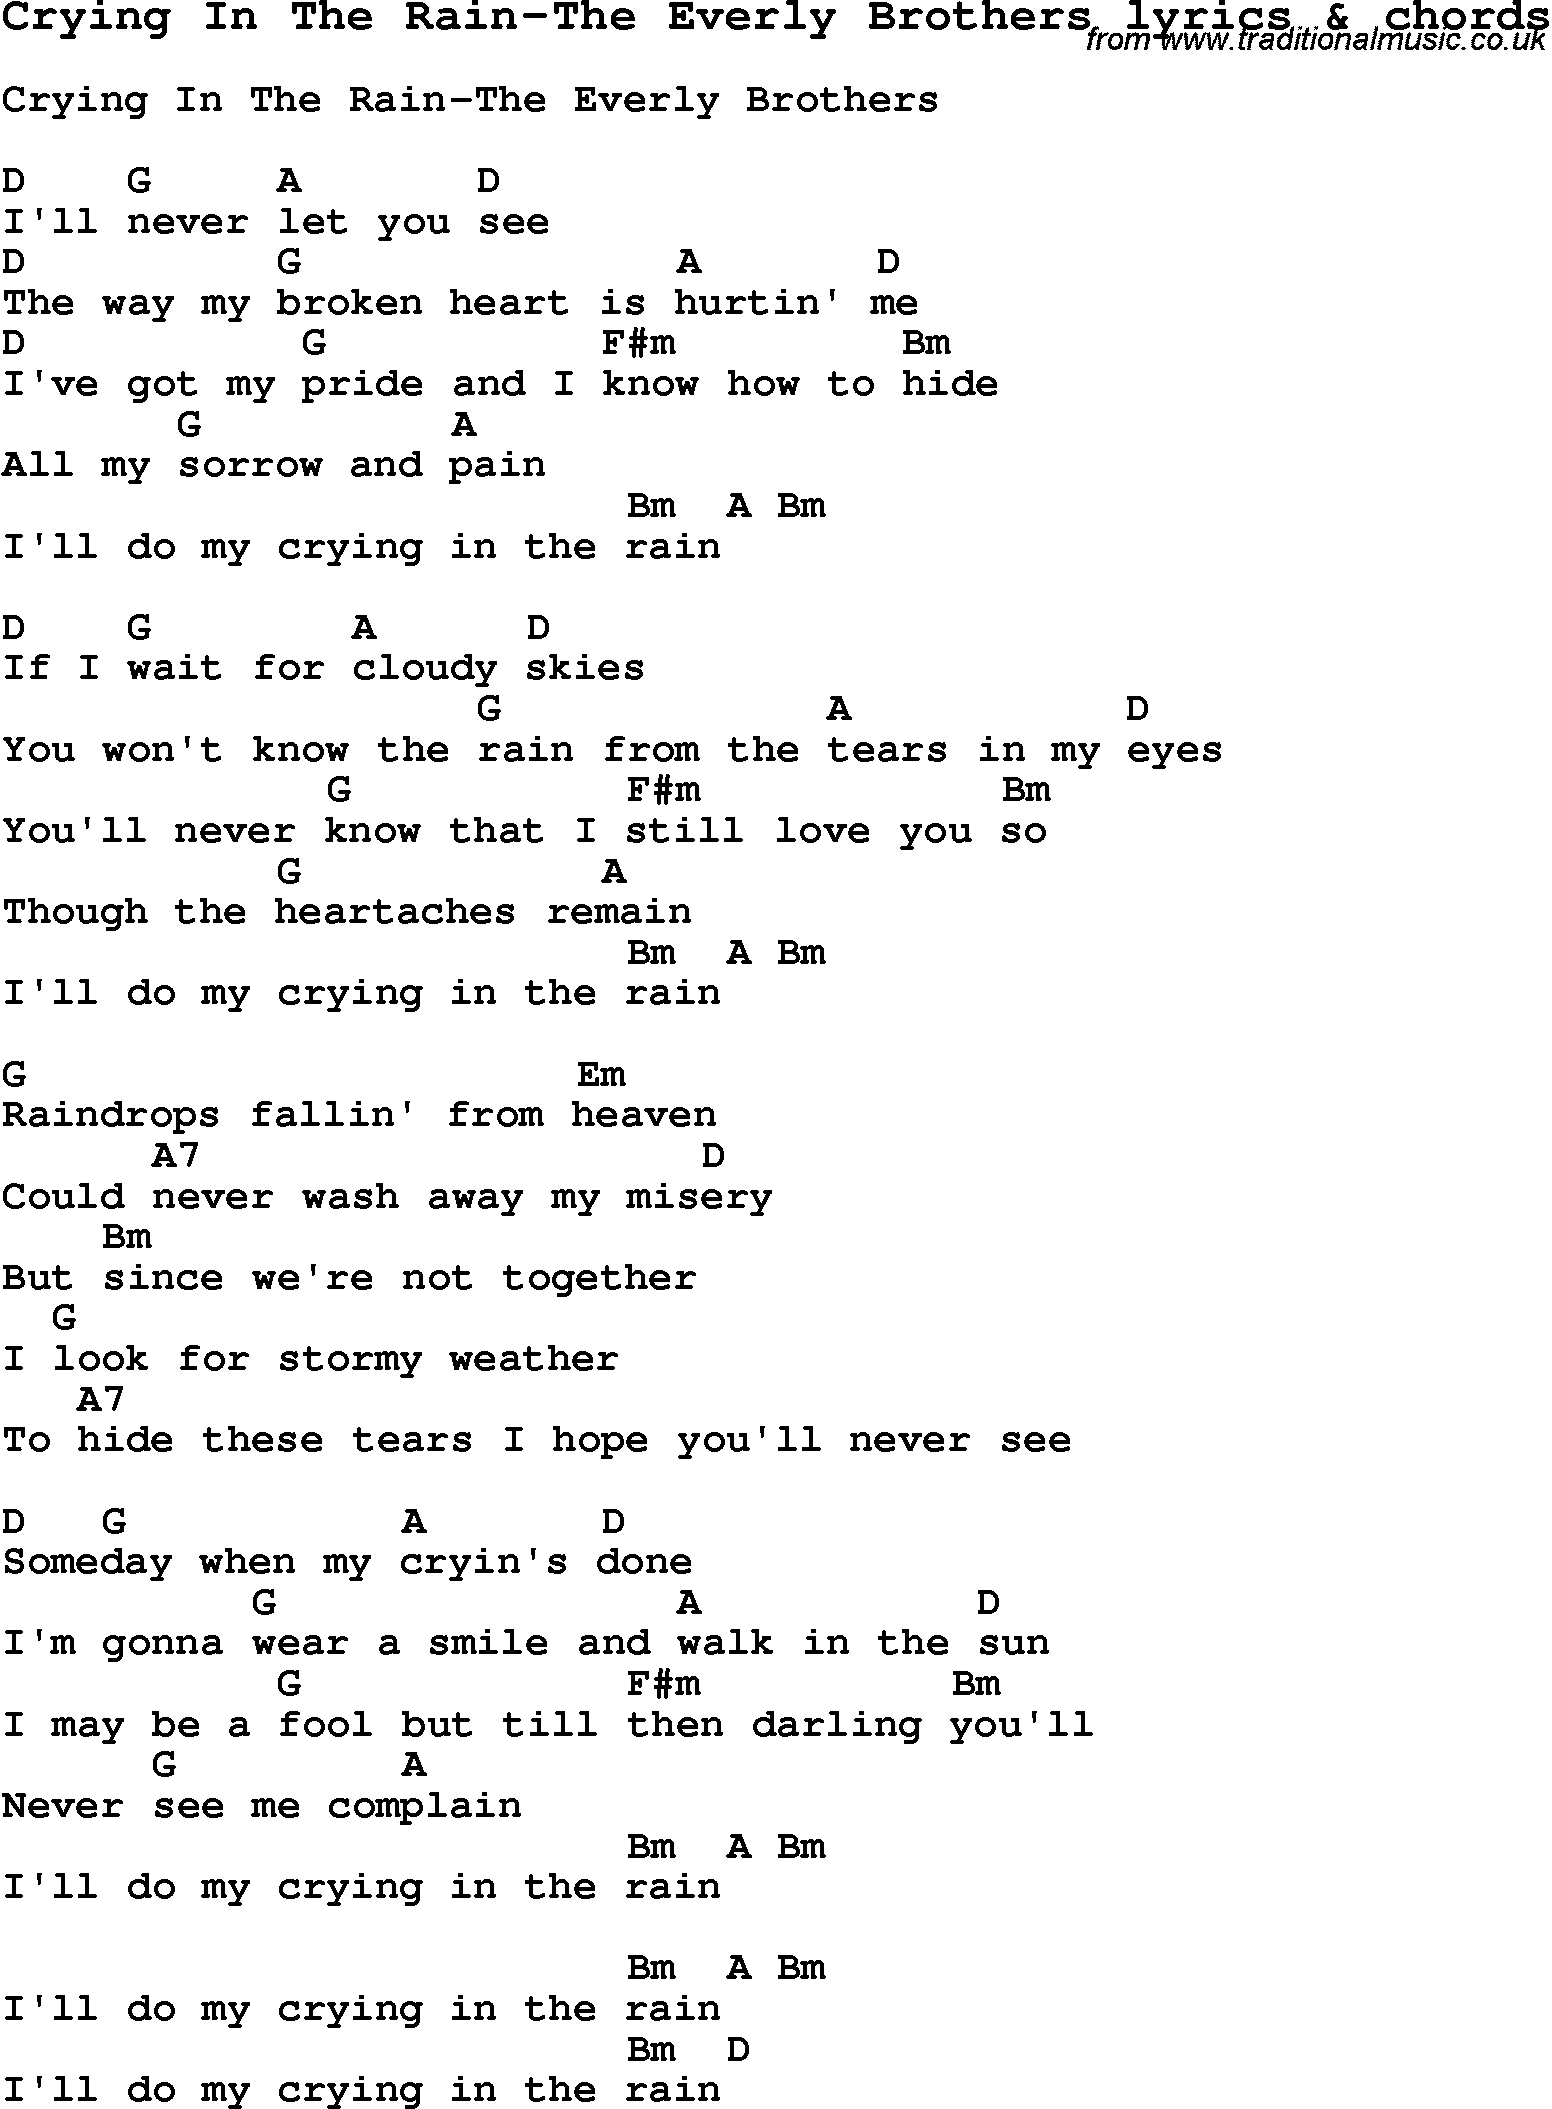 Love Song Lyrics for: Crying In The Rain-The Everly Brothers with chords for Ukulele, Guitar Banjo etc.